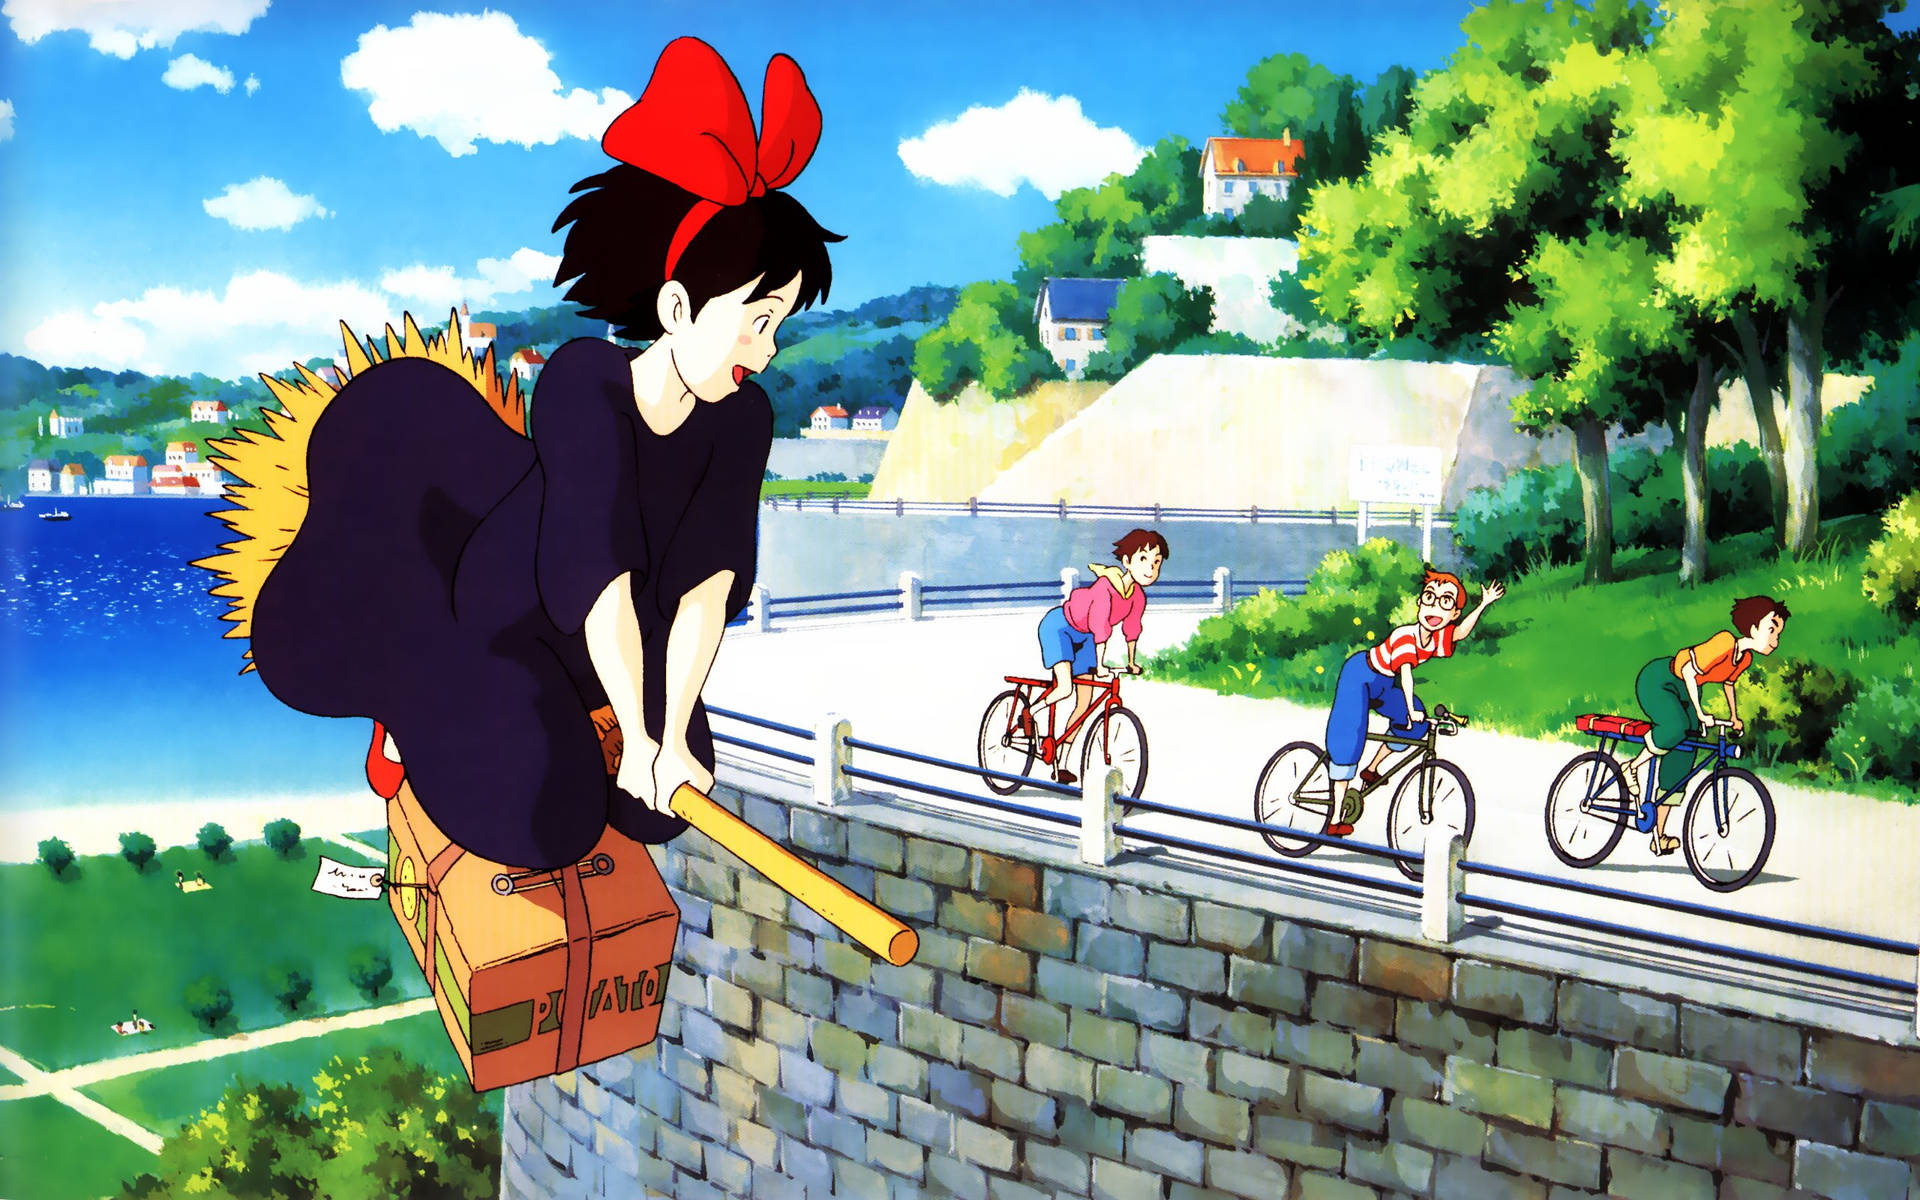 Kiki And Friends From Kikis Delivery Service Wallpaper